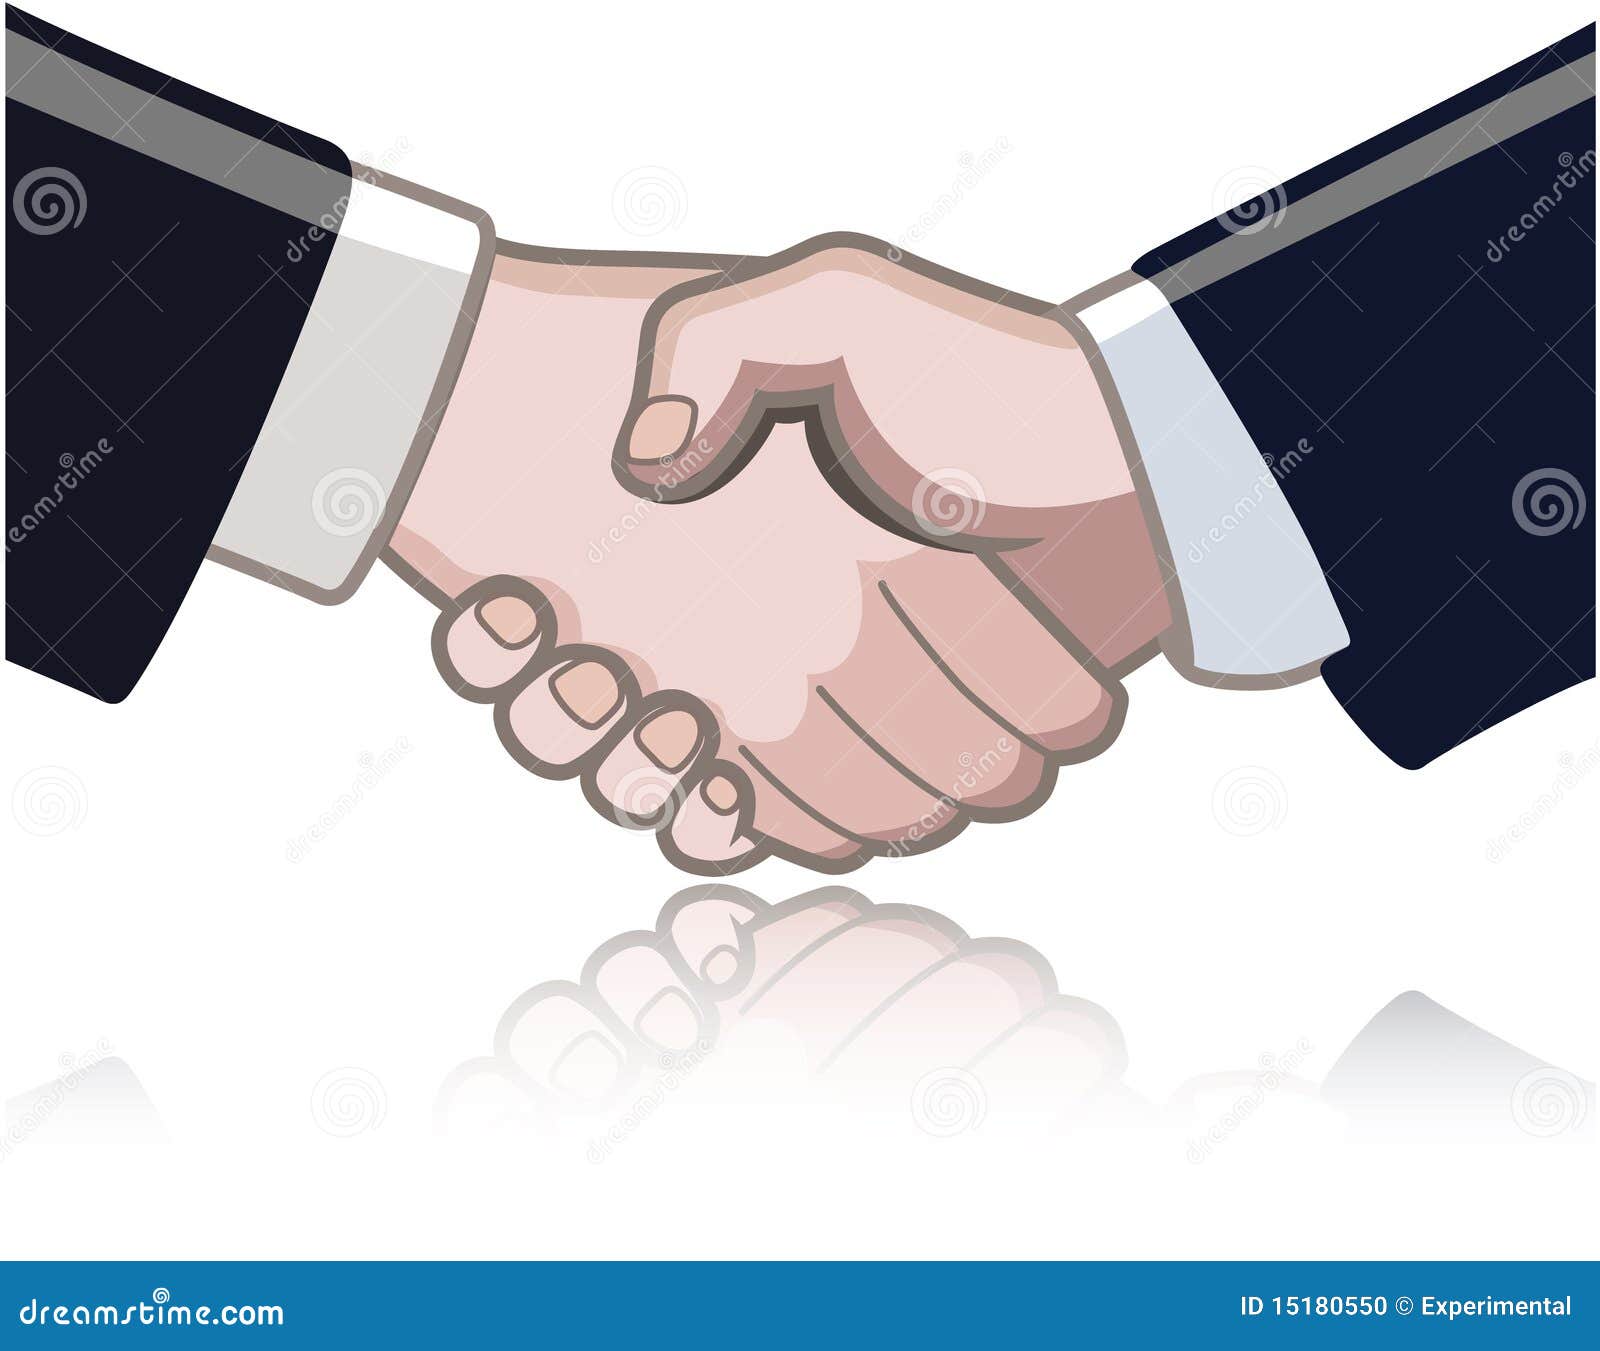 hand shake between two persons